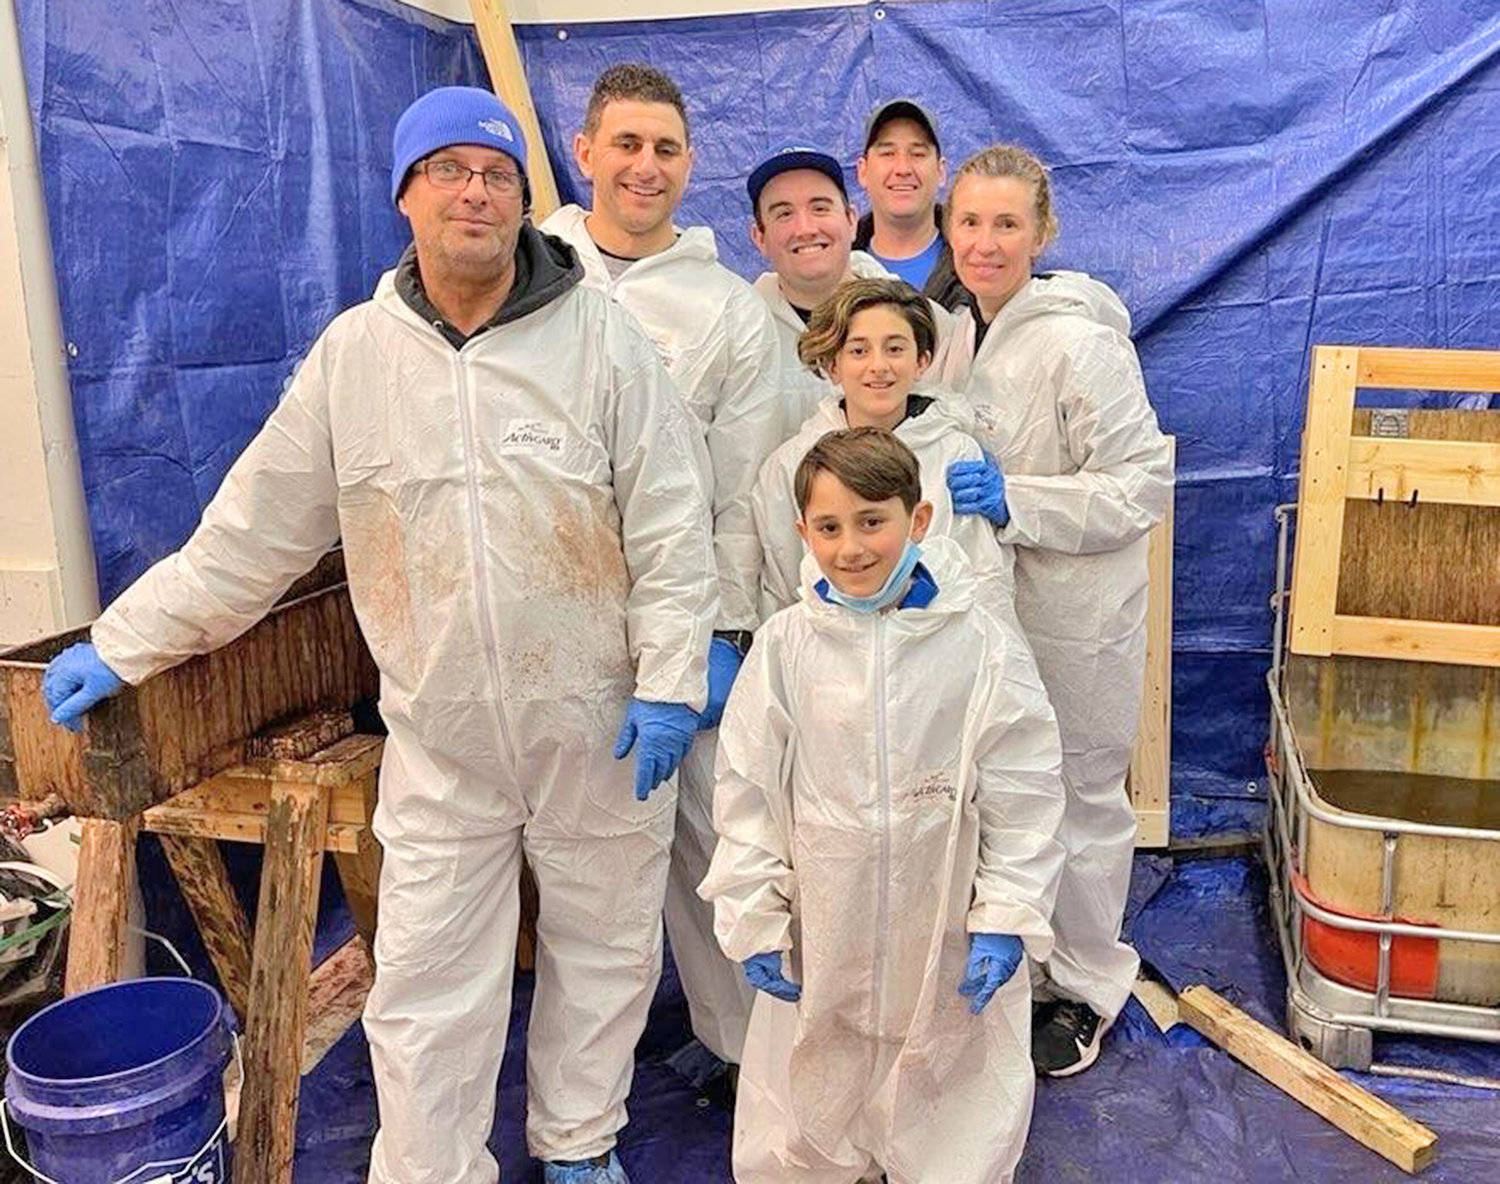 DIRTY WORK, BUT WORTH IT — Pictured are Tim Sheldon, Matt Nimey, Easton May, Matthew Nimey, Amelia Nimey, Richard Messineo and Beth Coombs at the staining tanks for Sleep in Heavenly Peace’s Mega Build on Sunday, April 3, at Sangertown Square in New Hartford.